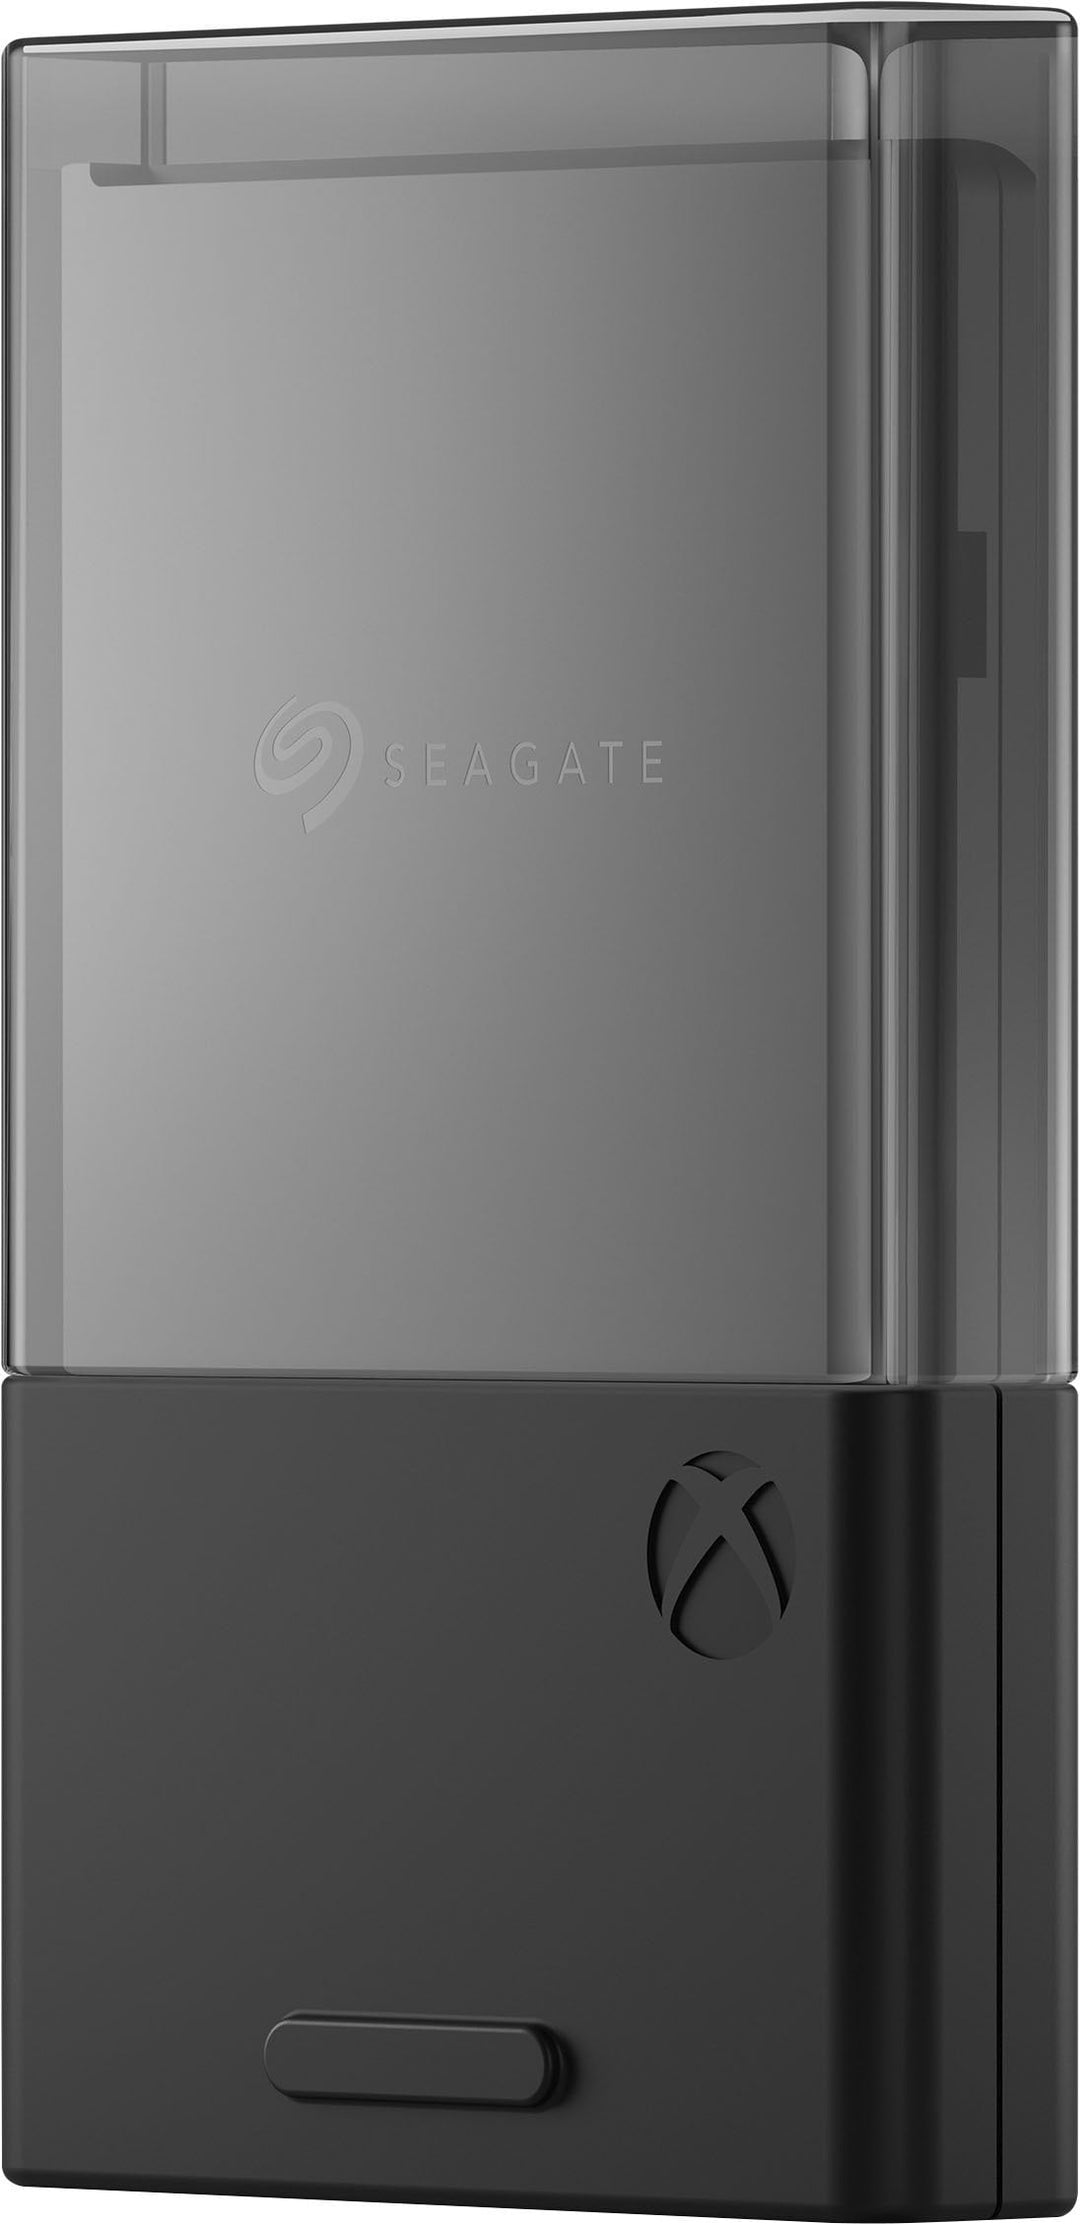 Seagate - 2TB Storage Expansion Card for Xbox Series X|S Internal NVMe SSD - Black_2